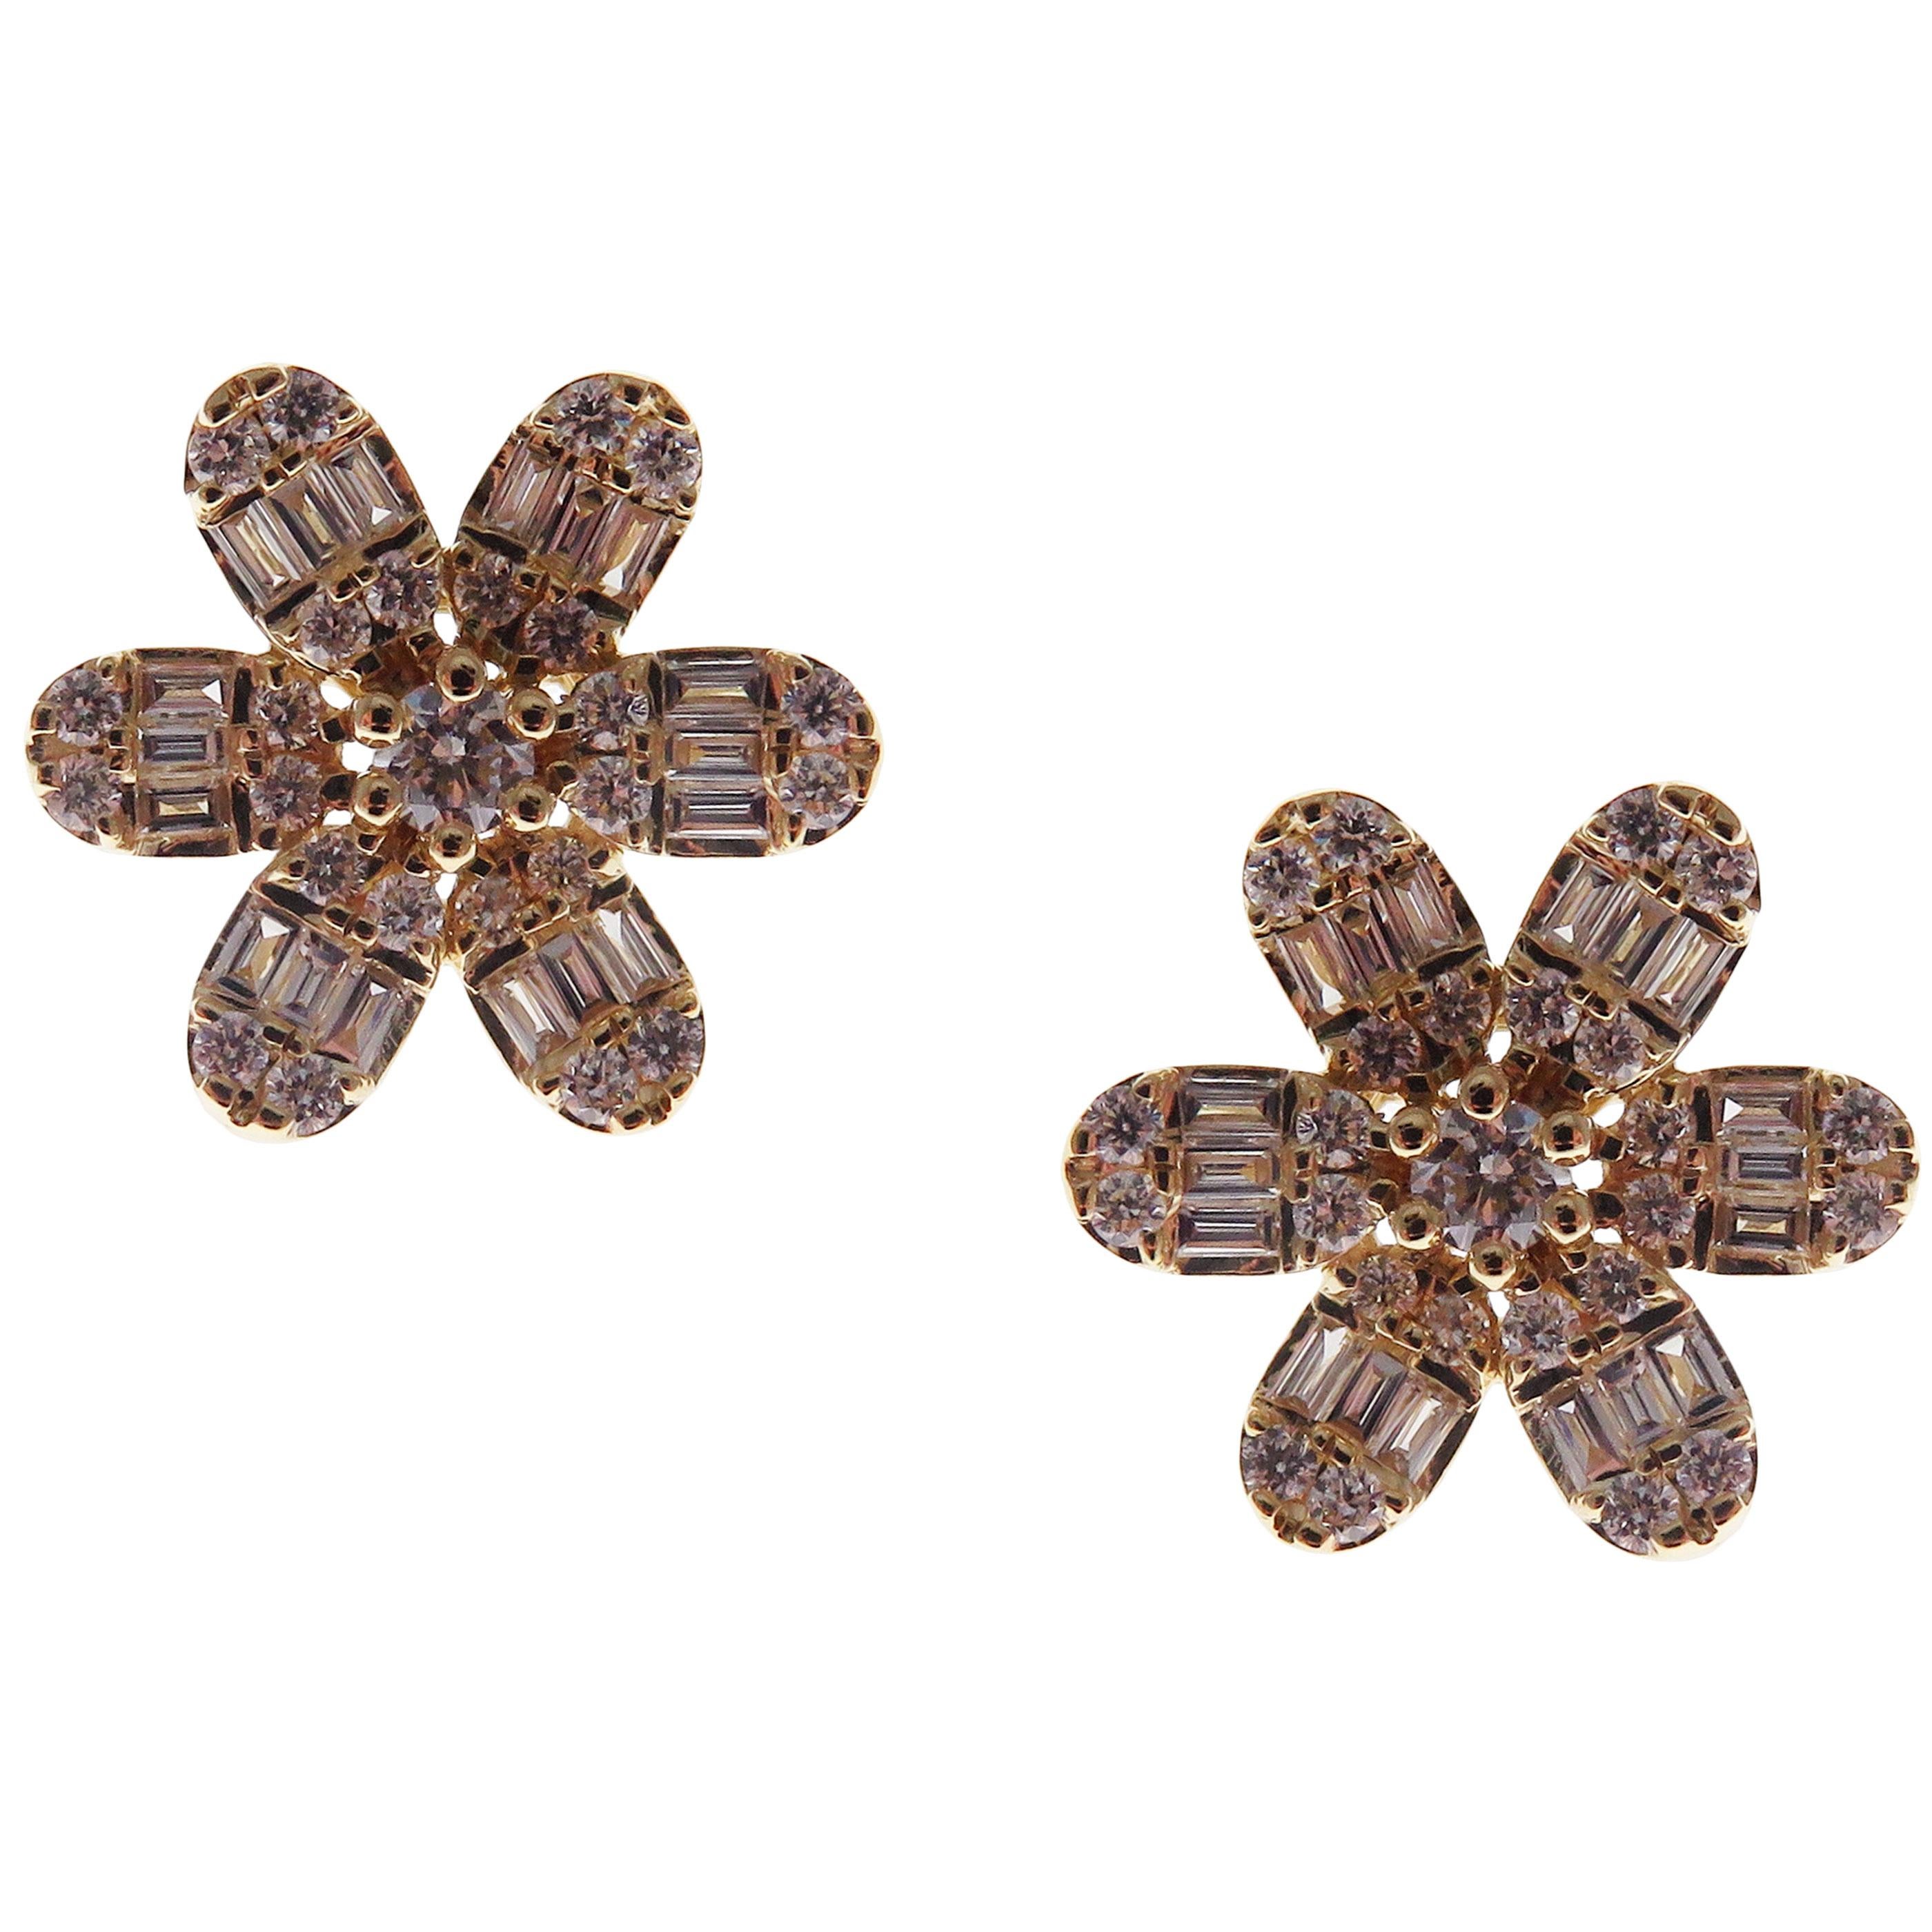 These classic flower stud earrings with round and baguette white diamonds are crafted in 18-karat white gold, featuring 50 round white diamonds totaling of 0.60 carats and 36 baguette white diamonds totaling of 0.39 carats.
These earrings come with